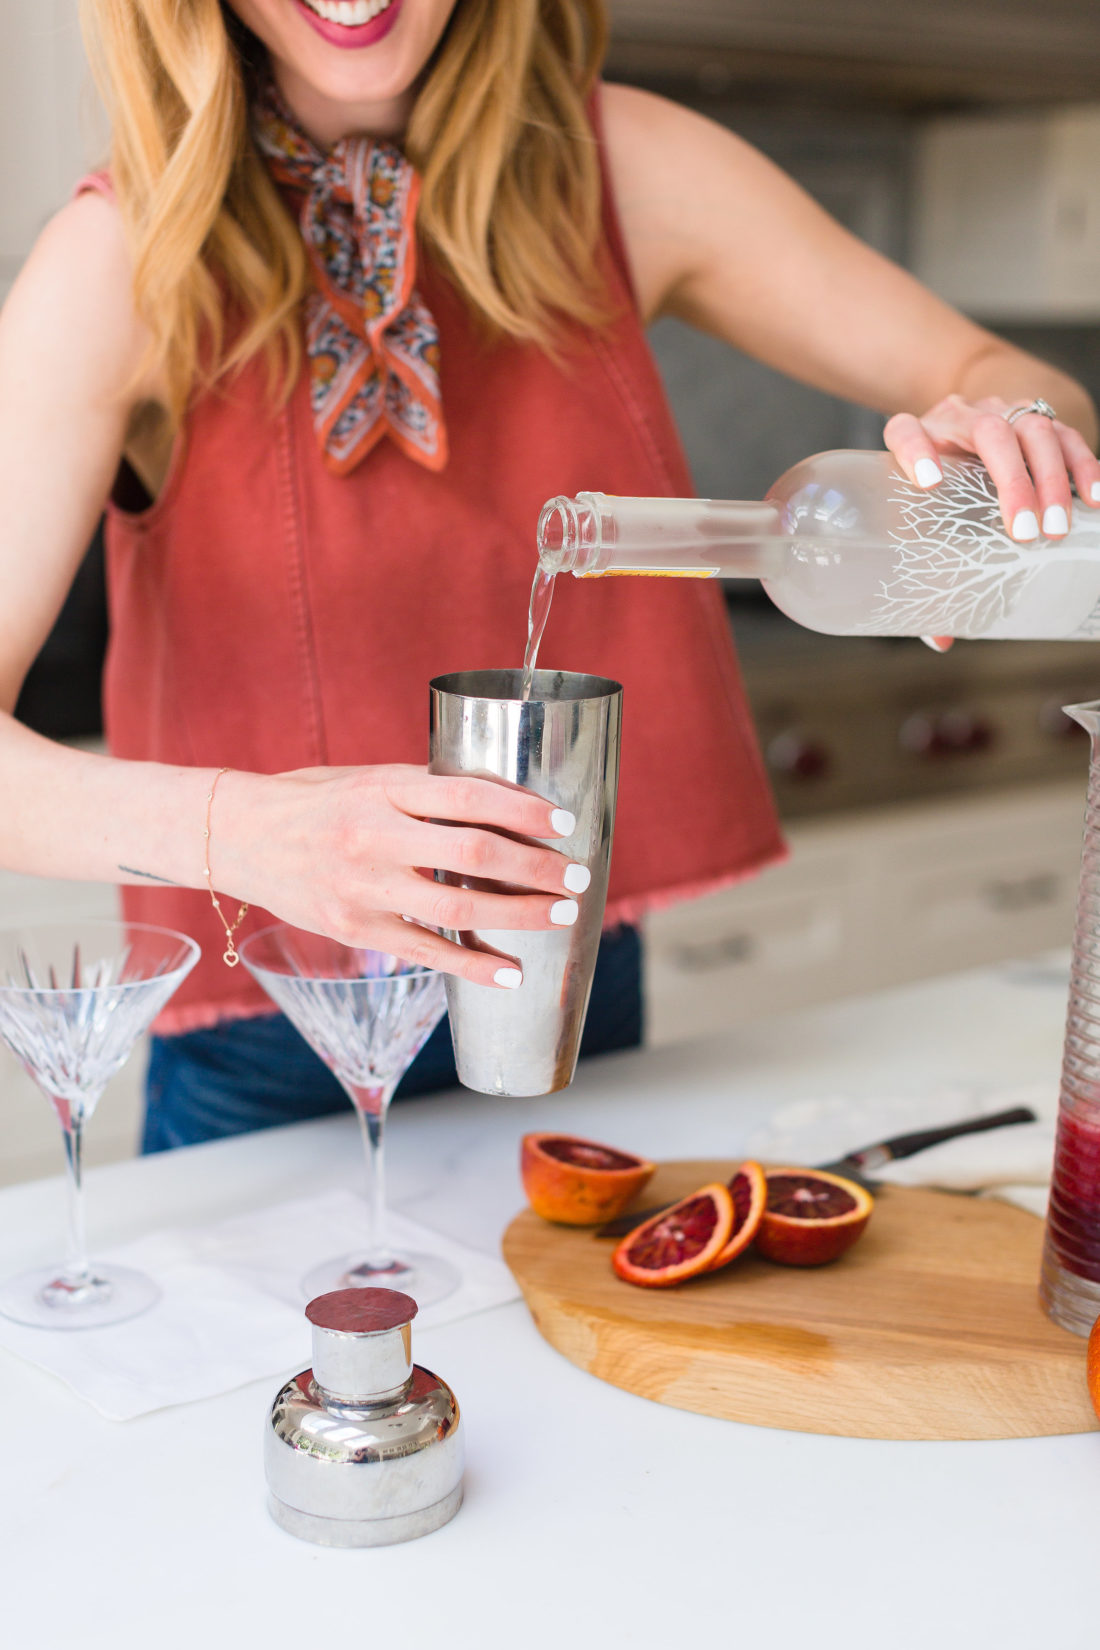 Eva Amurri Martino pours vodka in to a cocktail shaker to make blood orange and ginger martinis